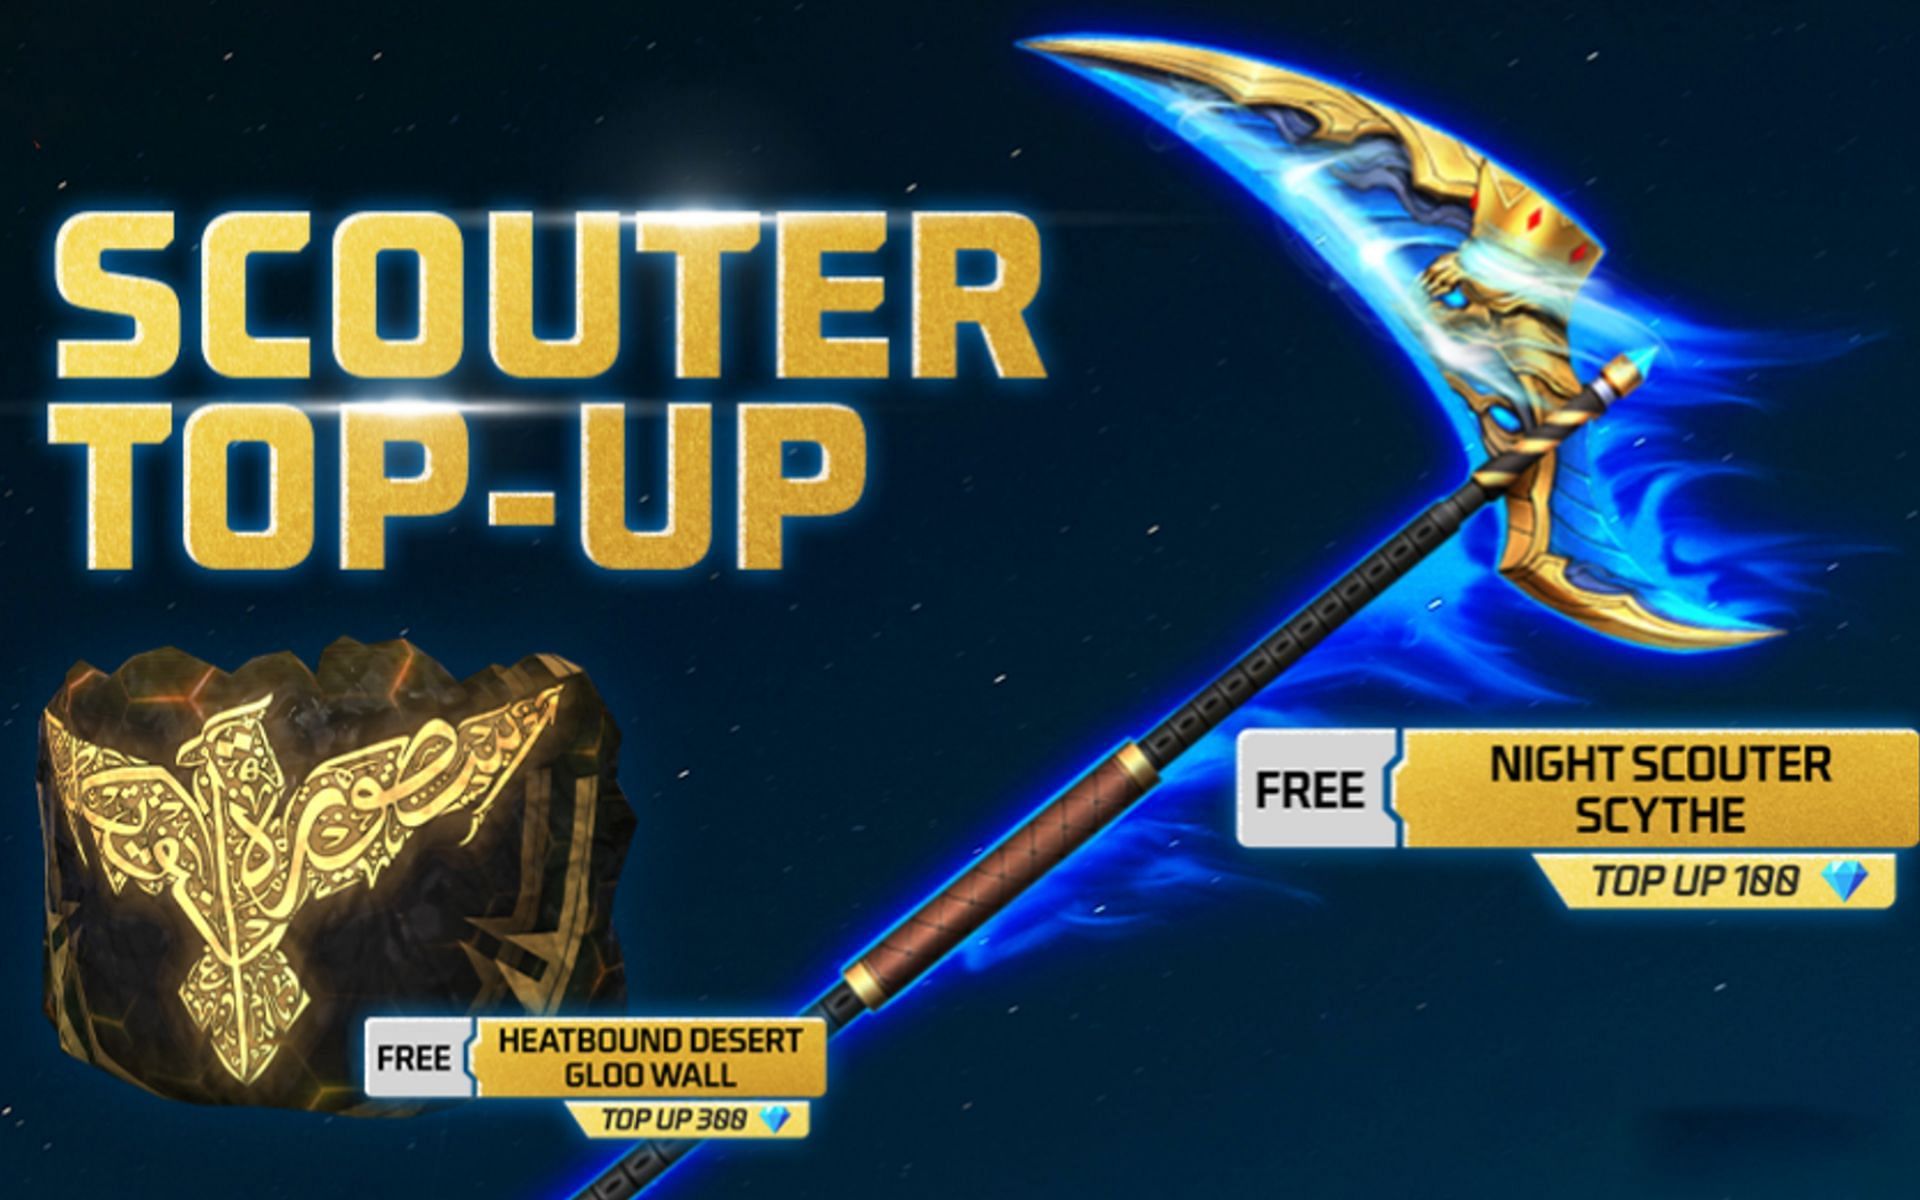 The new Scouter Top-Up is currently available in Free Fire MAX (Image via Garena)